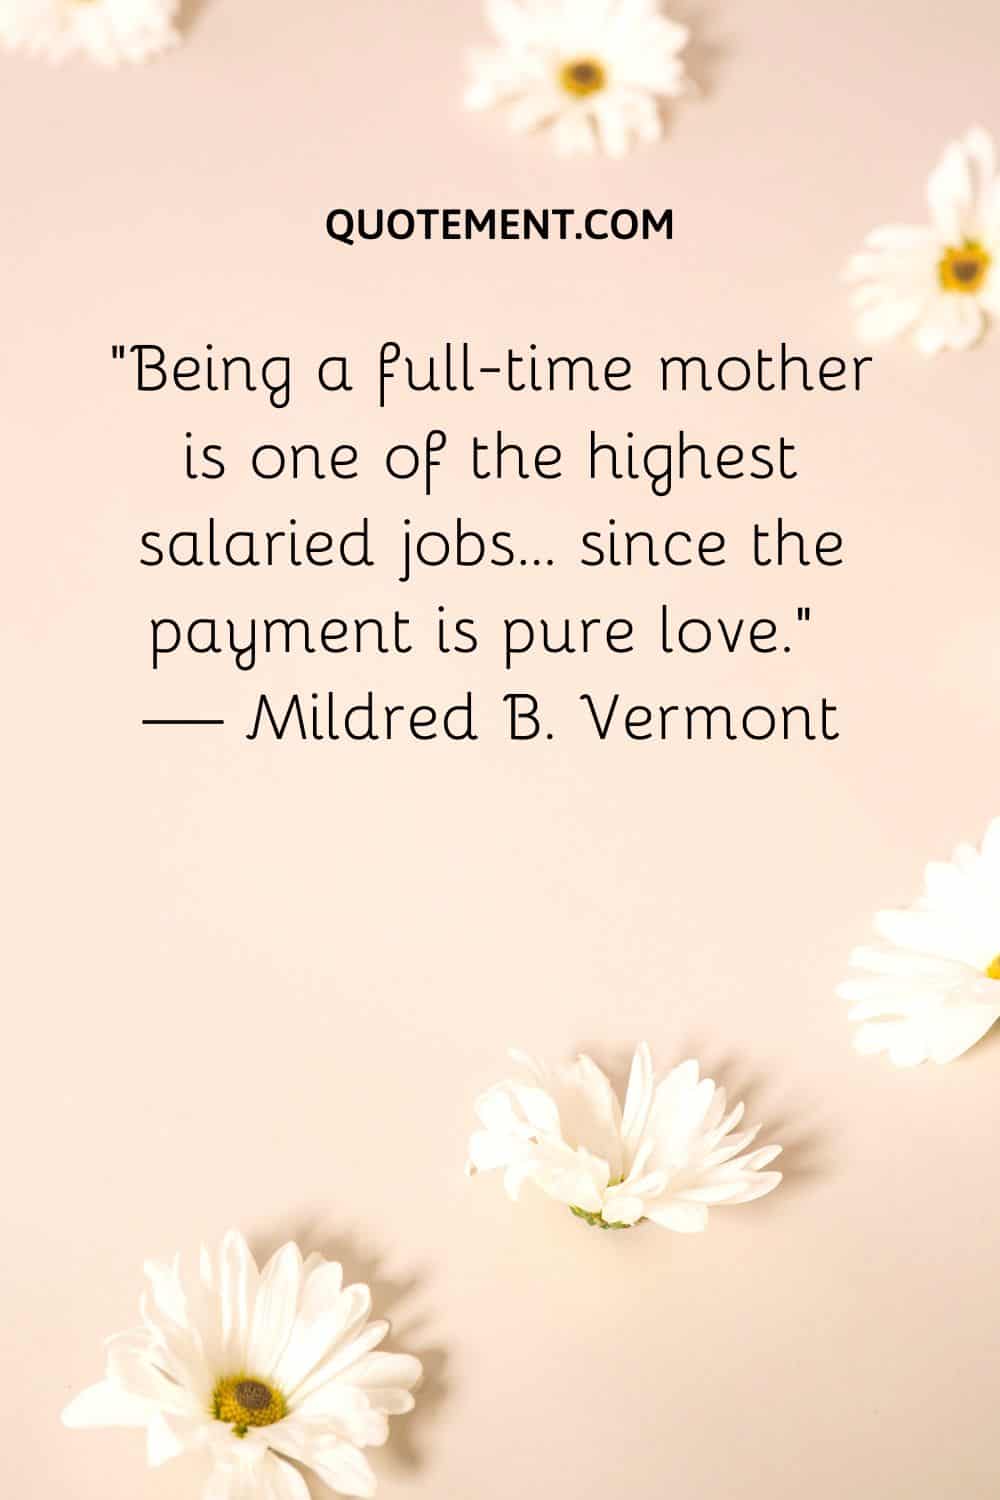 Being a full-time mother is one of the highest salaried jobs